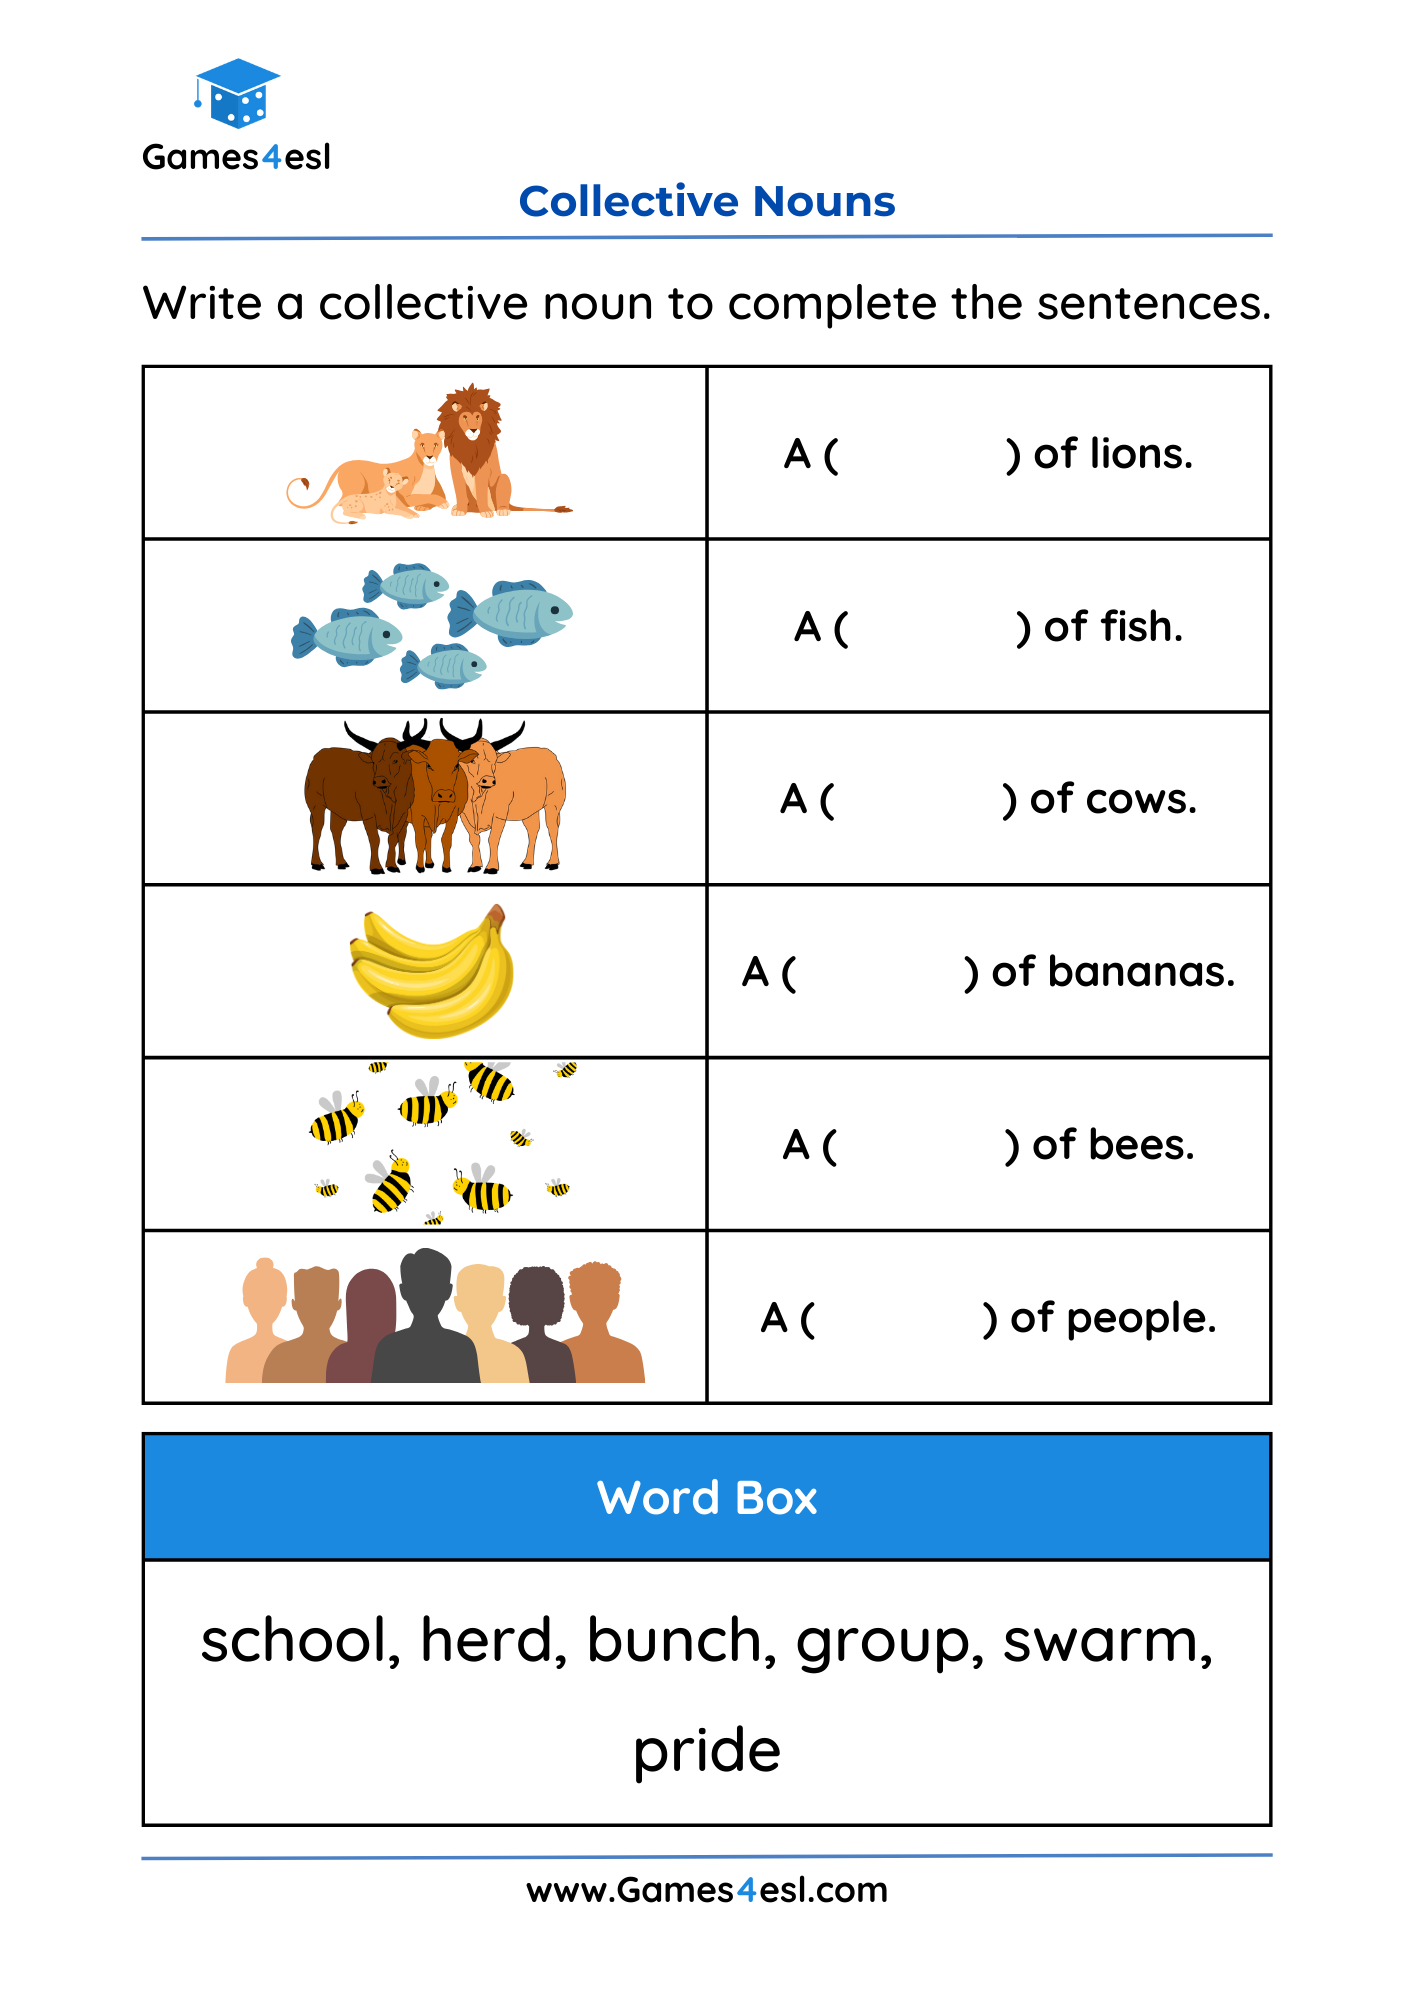 A Grade 2 worksheet for teaching collective nouns.